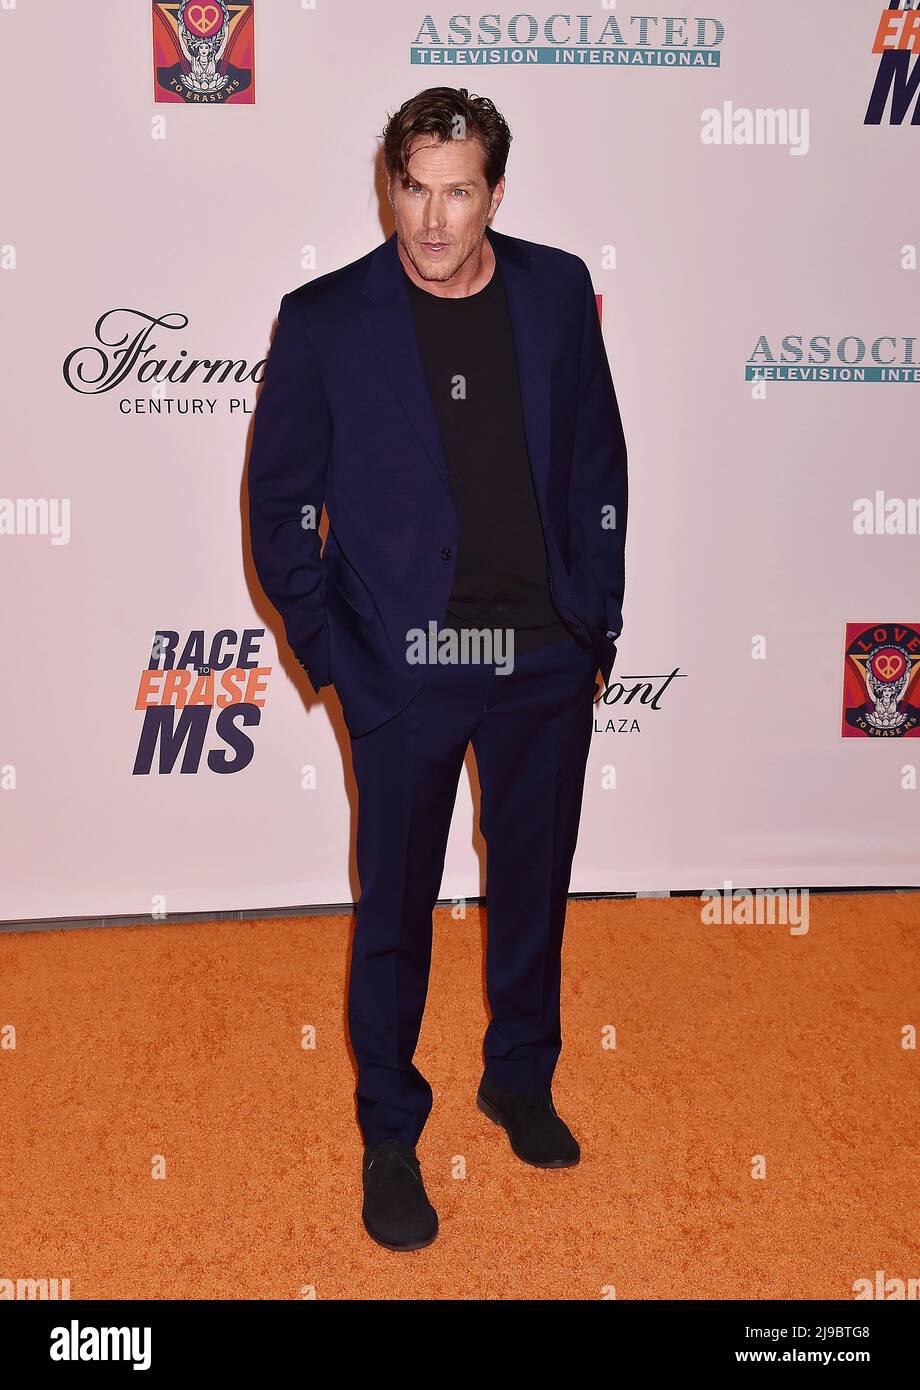 Los Angeles, Ca. 20th May, 2022. Jason Lewis attends the 29th Annual Race To Erase MS Gala at the Fairmont Century Plaza Hotel on May 20, 2022 in Los Angeles, California. Credit: Jeffrey Mayer/Jtm Photos/Media Punch/Alamy Live News Stock Photo